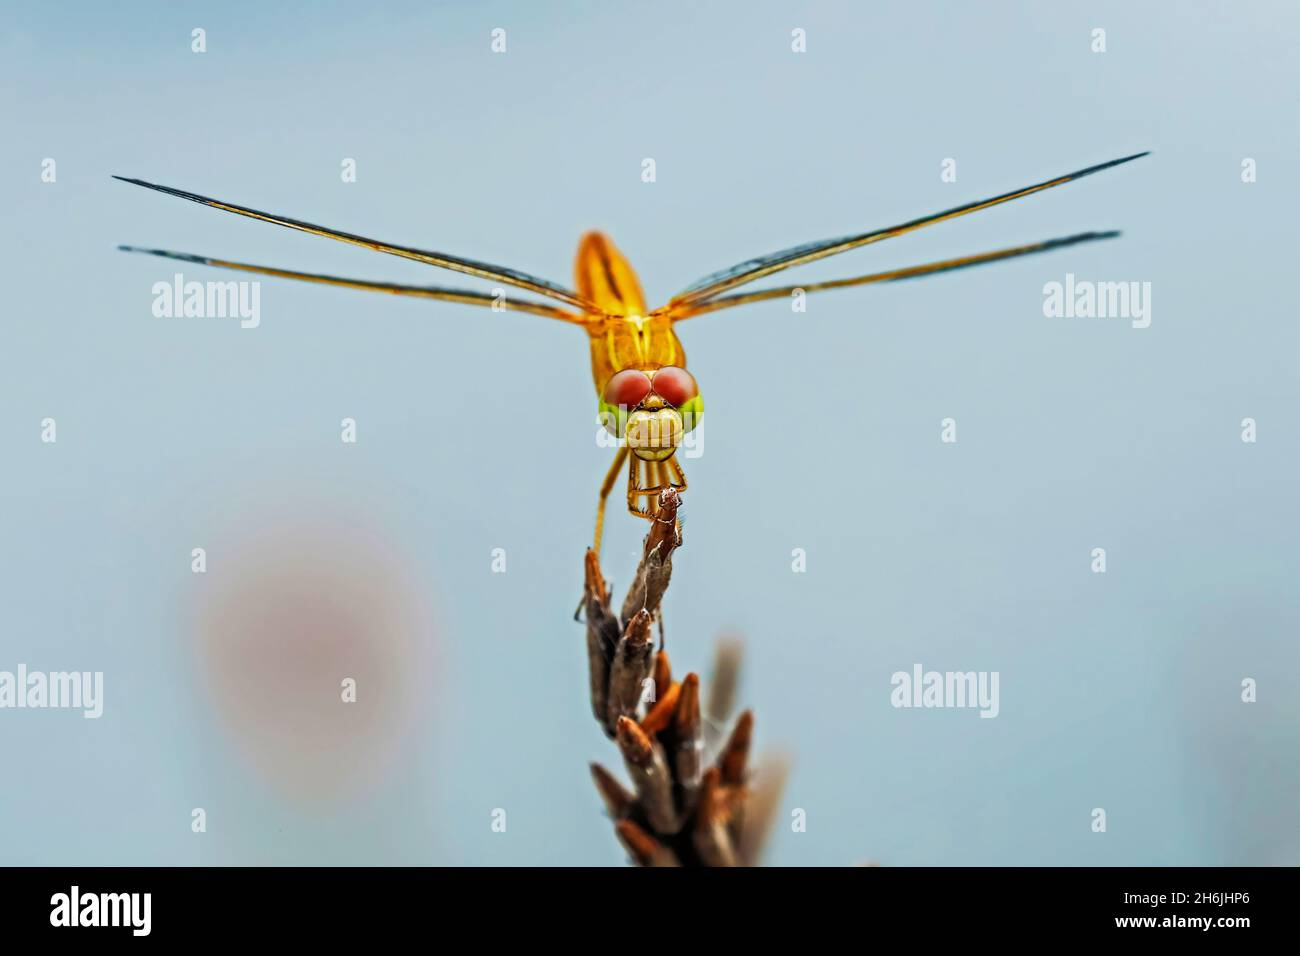 Asian Groundling dragonfly (Brachythemis contaminata) by fish pond, Rammang-Rammang, Maros, South Sulawesi, Indonesia, Southeast Asia, Asia Stock Photo